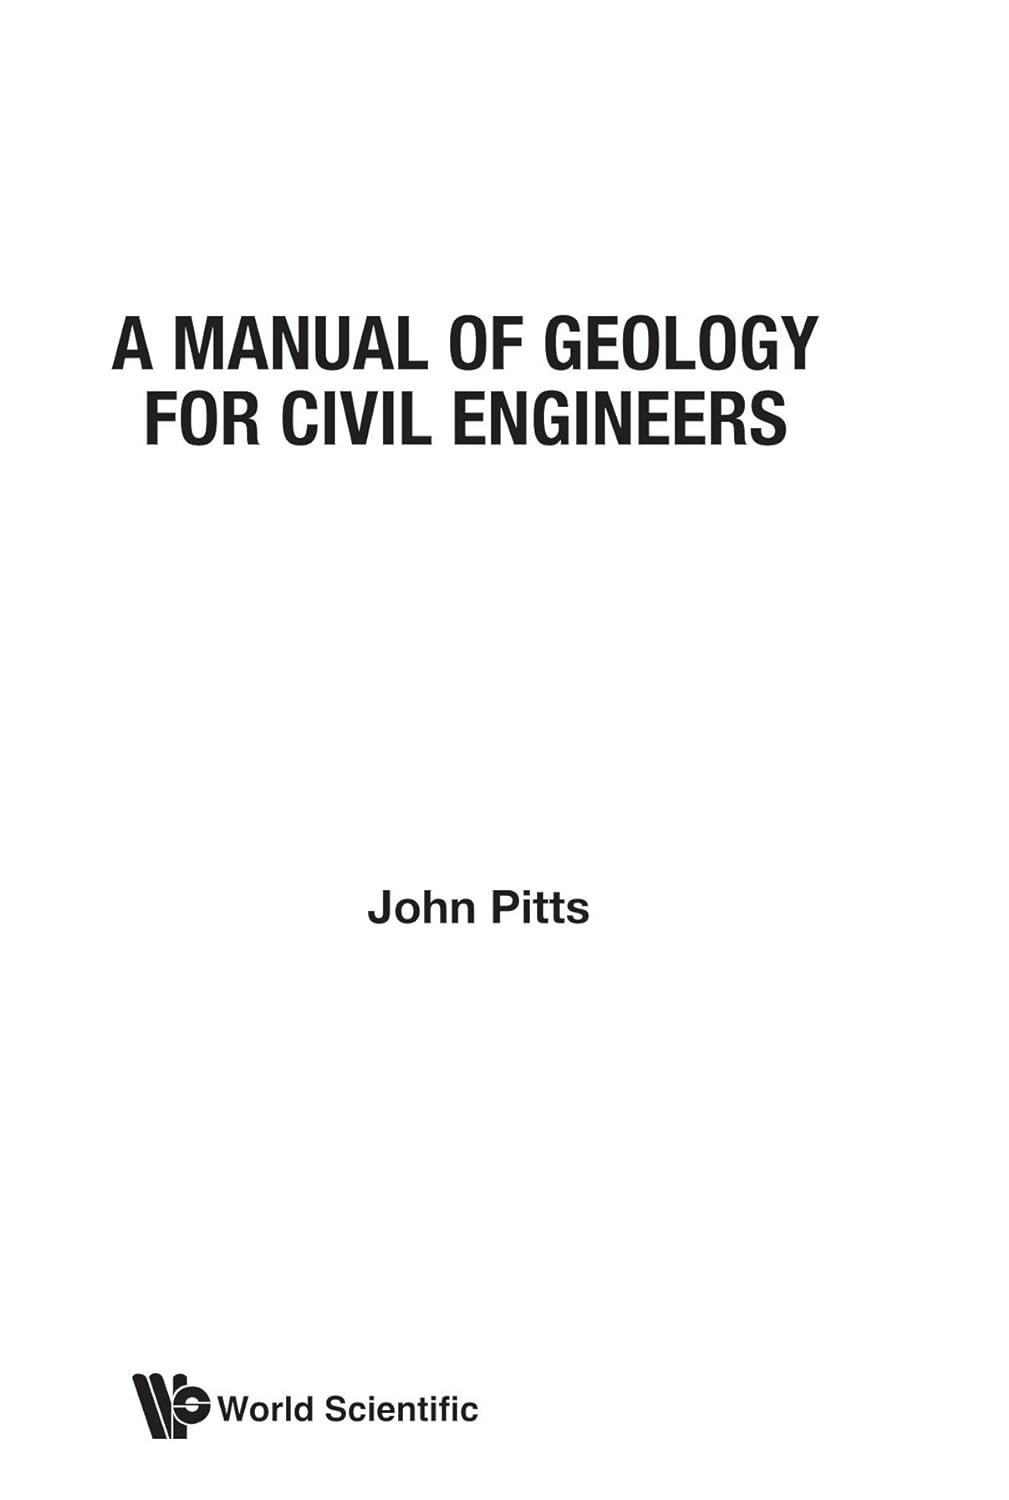 a manual of geology for civil engineers 1st edition john pitts 9971978059, 978-9971978051